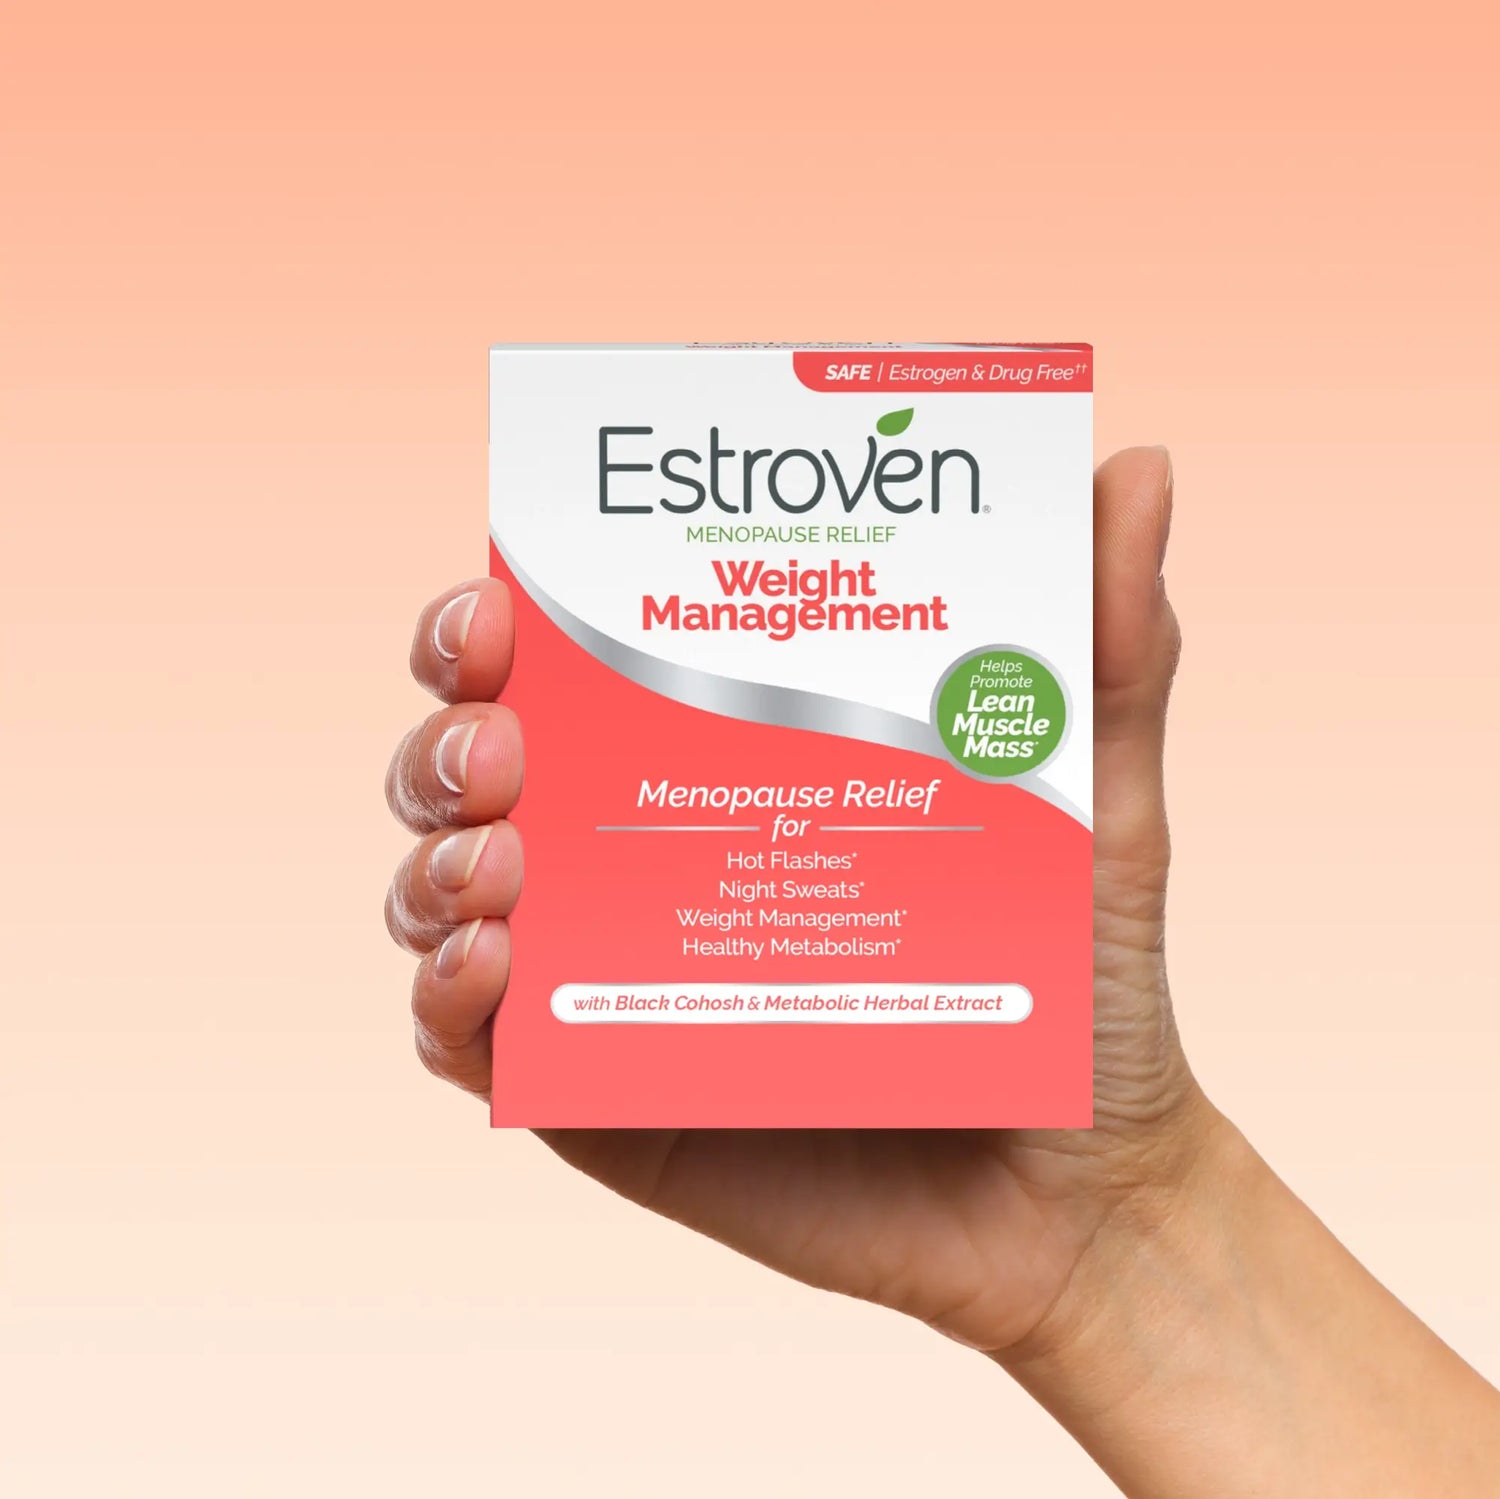 hand holding box of Estroven Weight Management